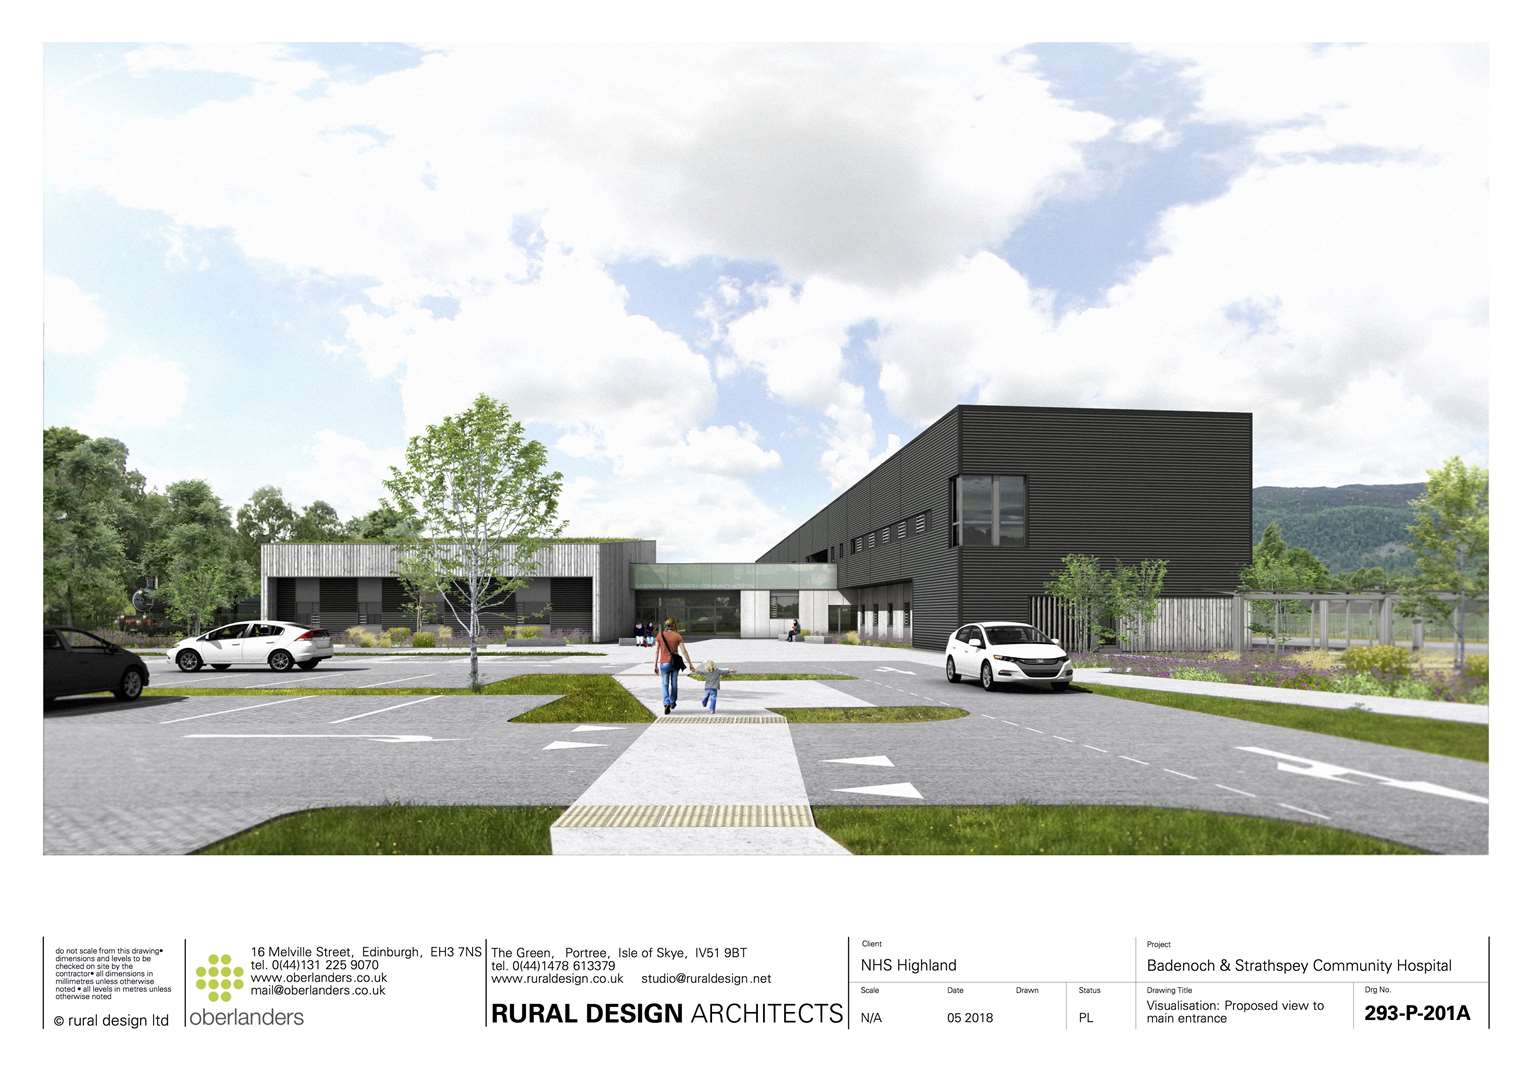 A visual impression of the new hospital to be built at Dalfaber in Aviemore.